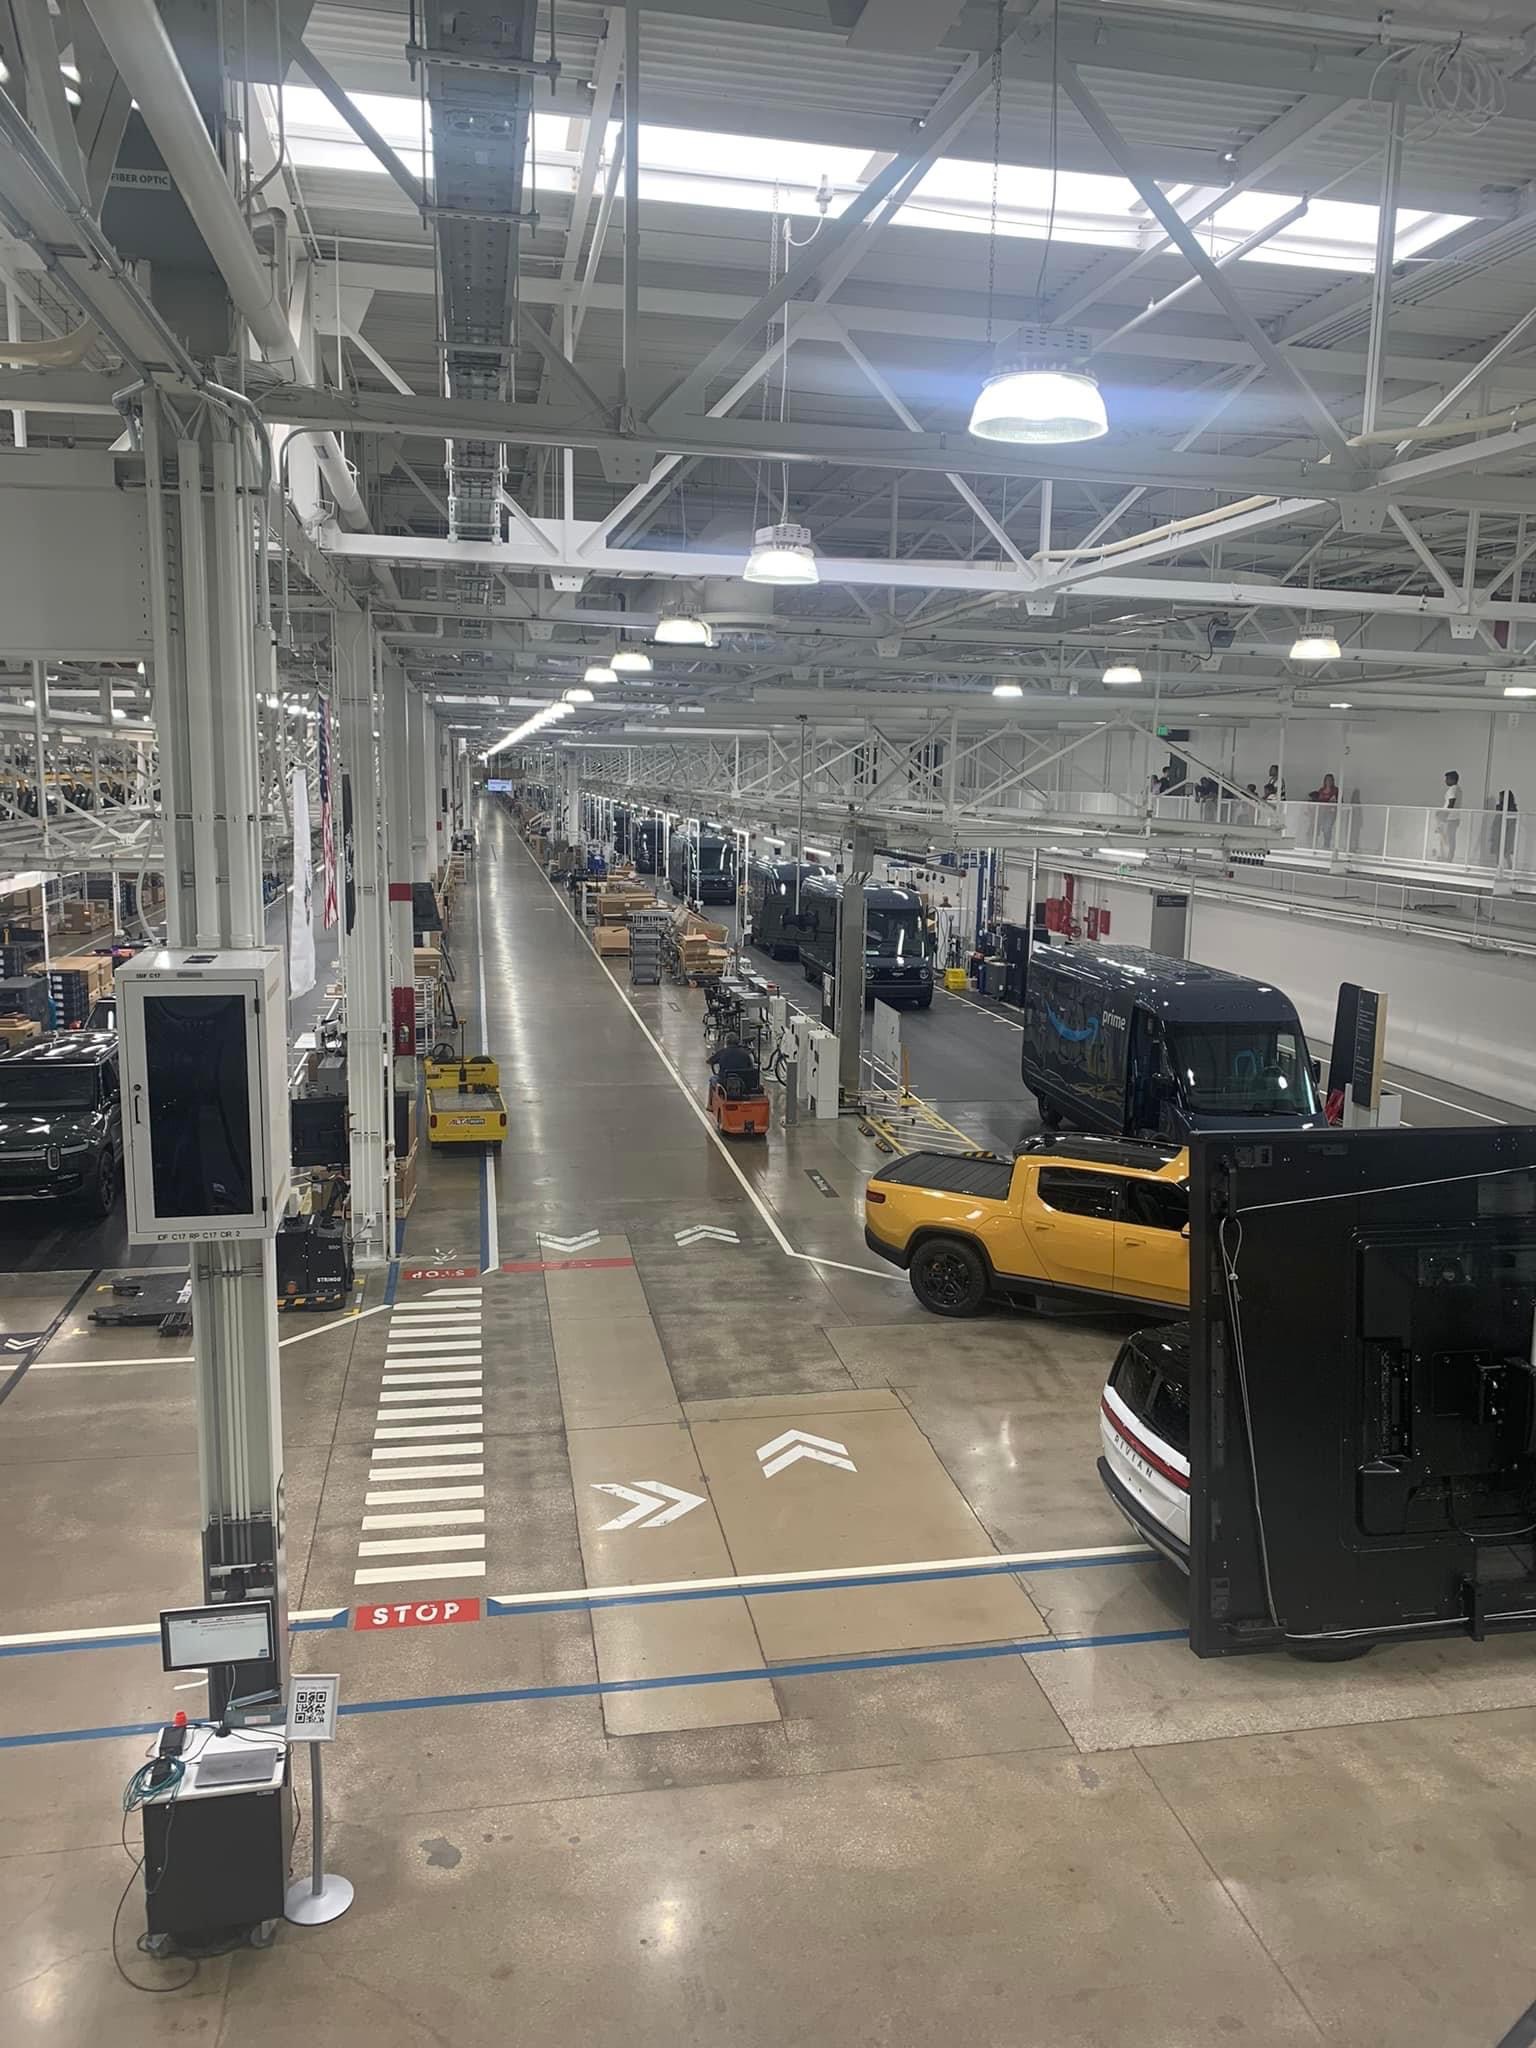 Rivian R1T R1S Tons of Rivians & Amazon Vans ready to ship... photos [removed at request of Rivian] D406E022-E6AE-490C-B791-220345A33614